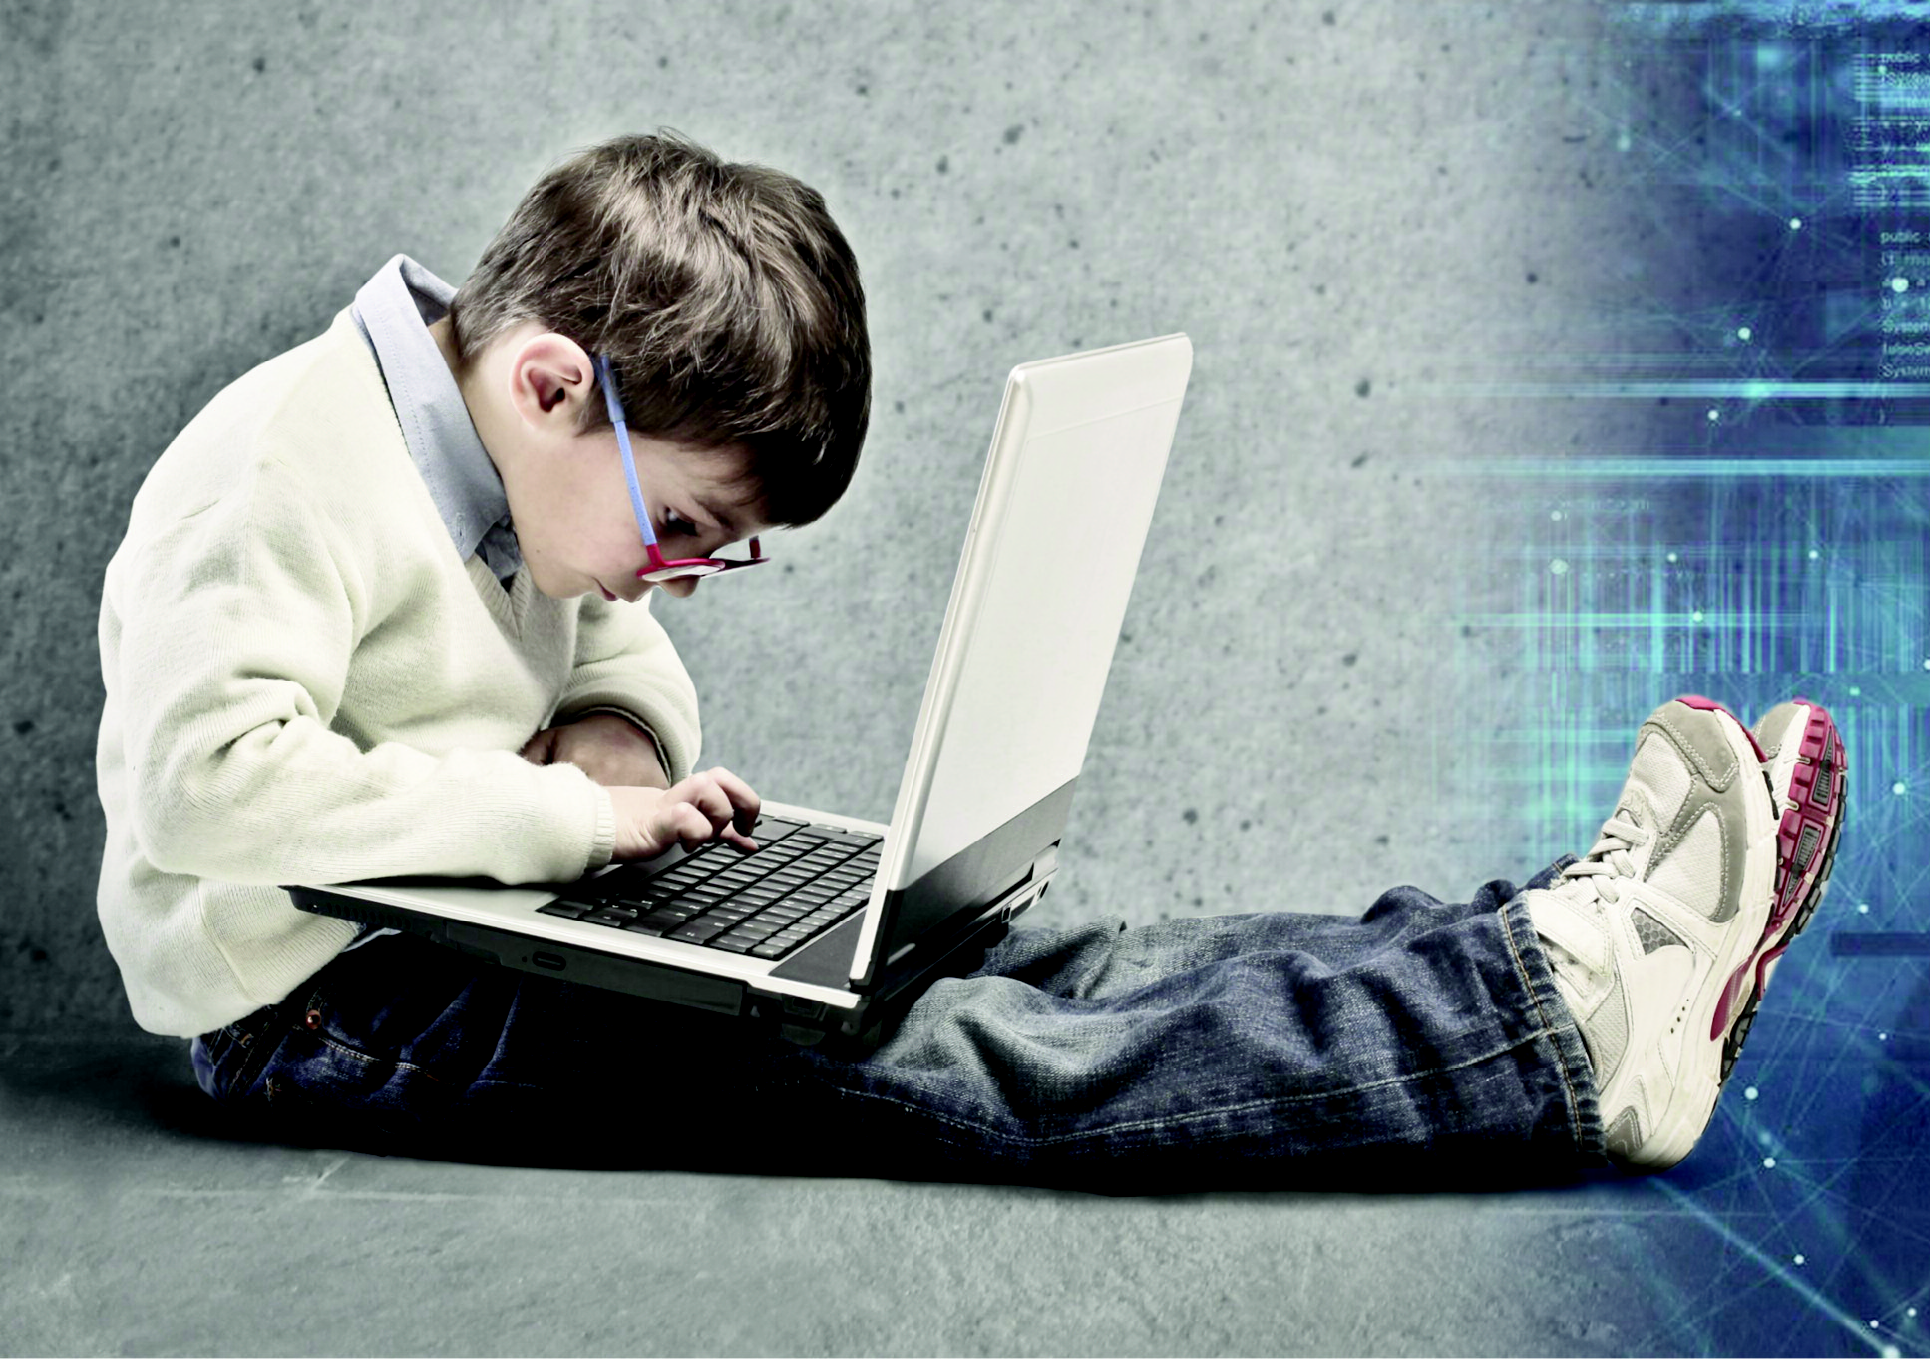 Child with notebook computer